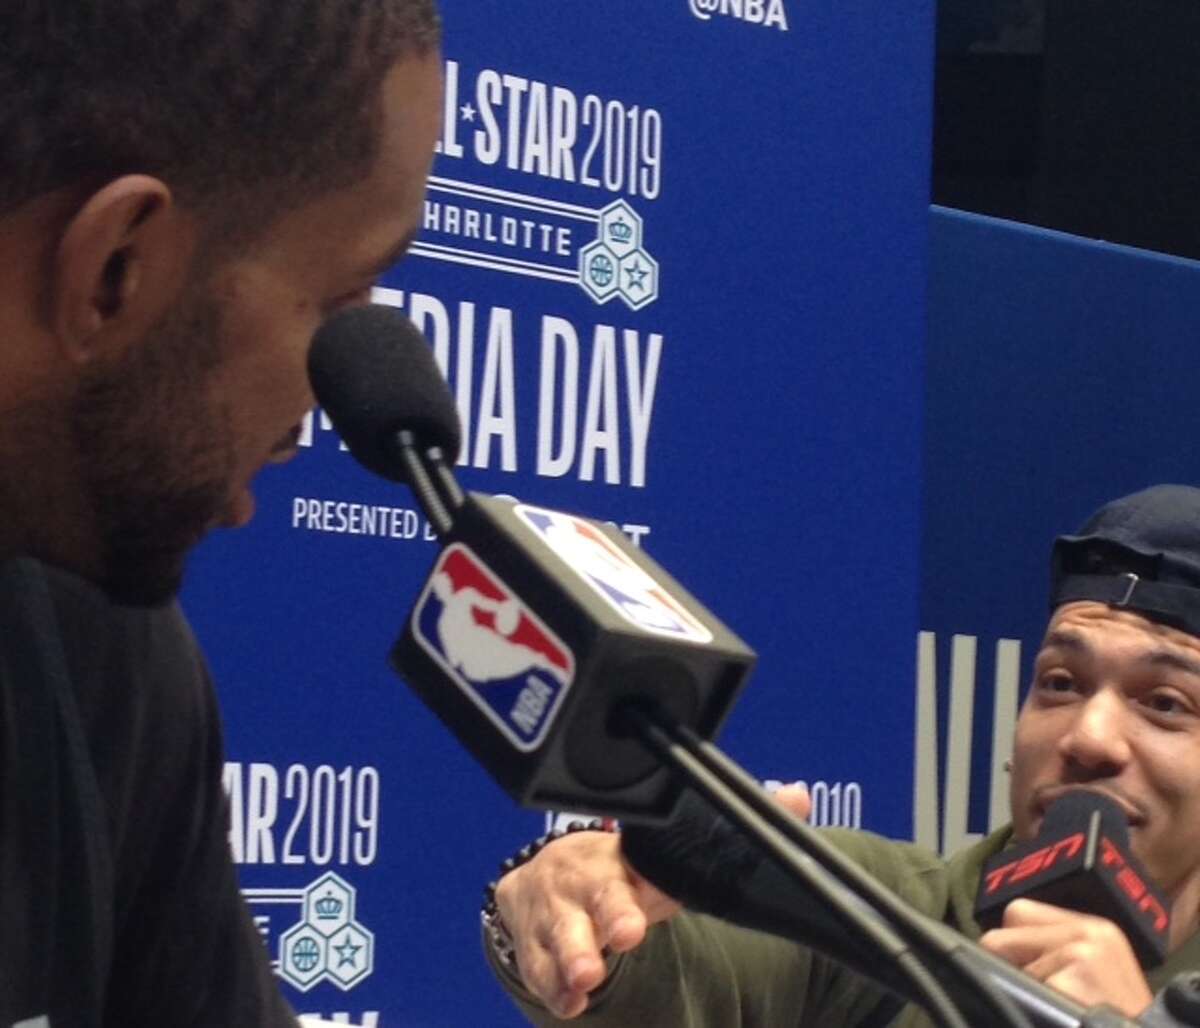 Danny Green interviews his former Spurs teammate LaMarcus Aldridge on Saturday at NBA All-Star Weekend in Charlotte.